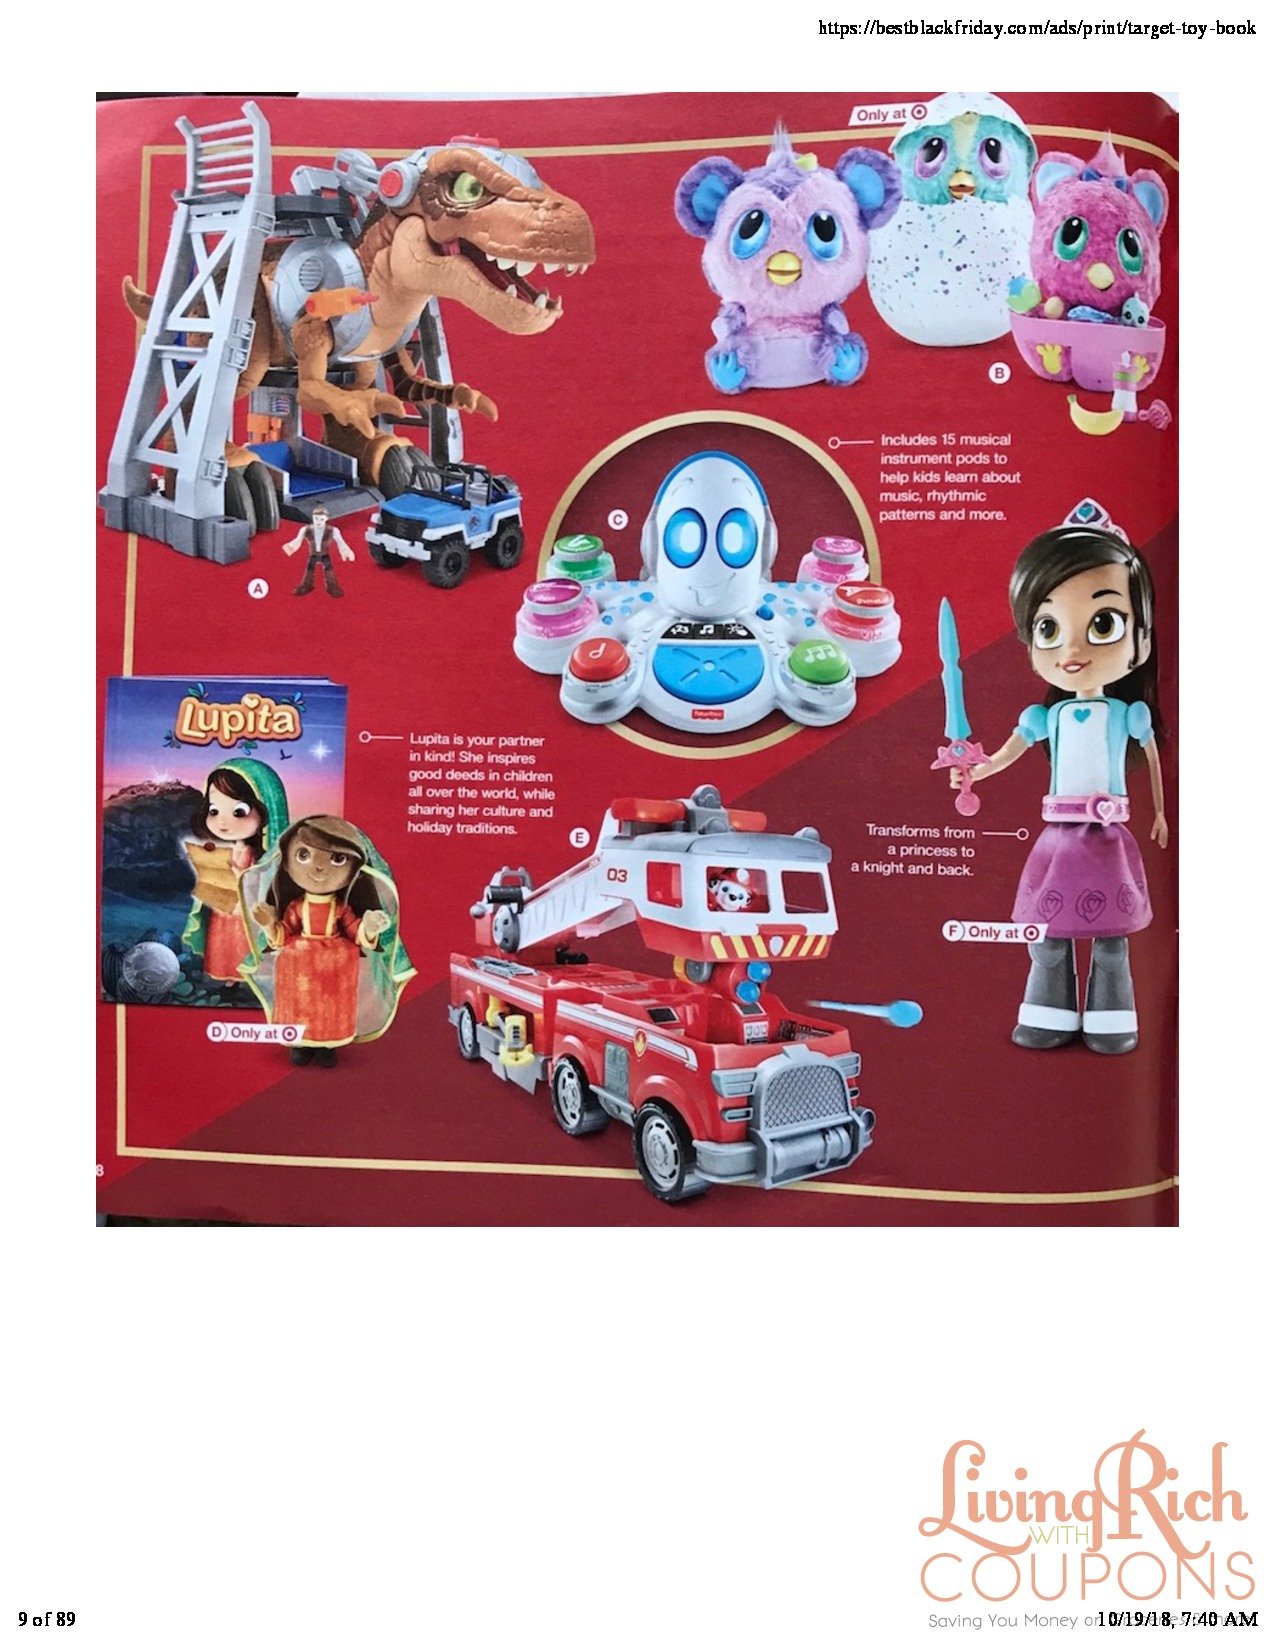 Target Toy Book 2018Living Rich With Coupons®